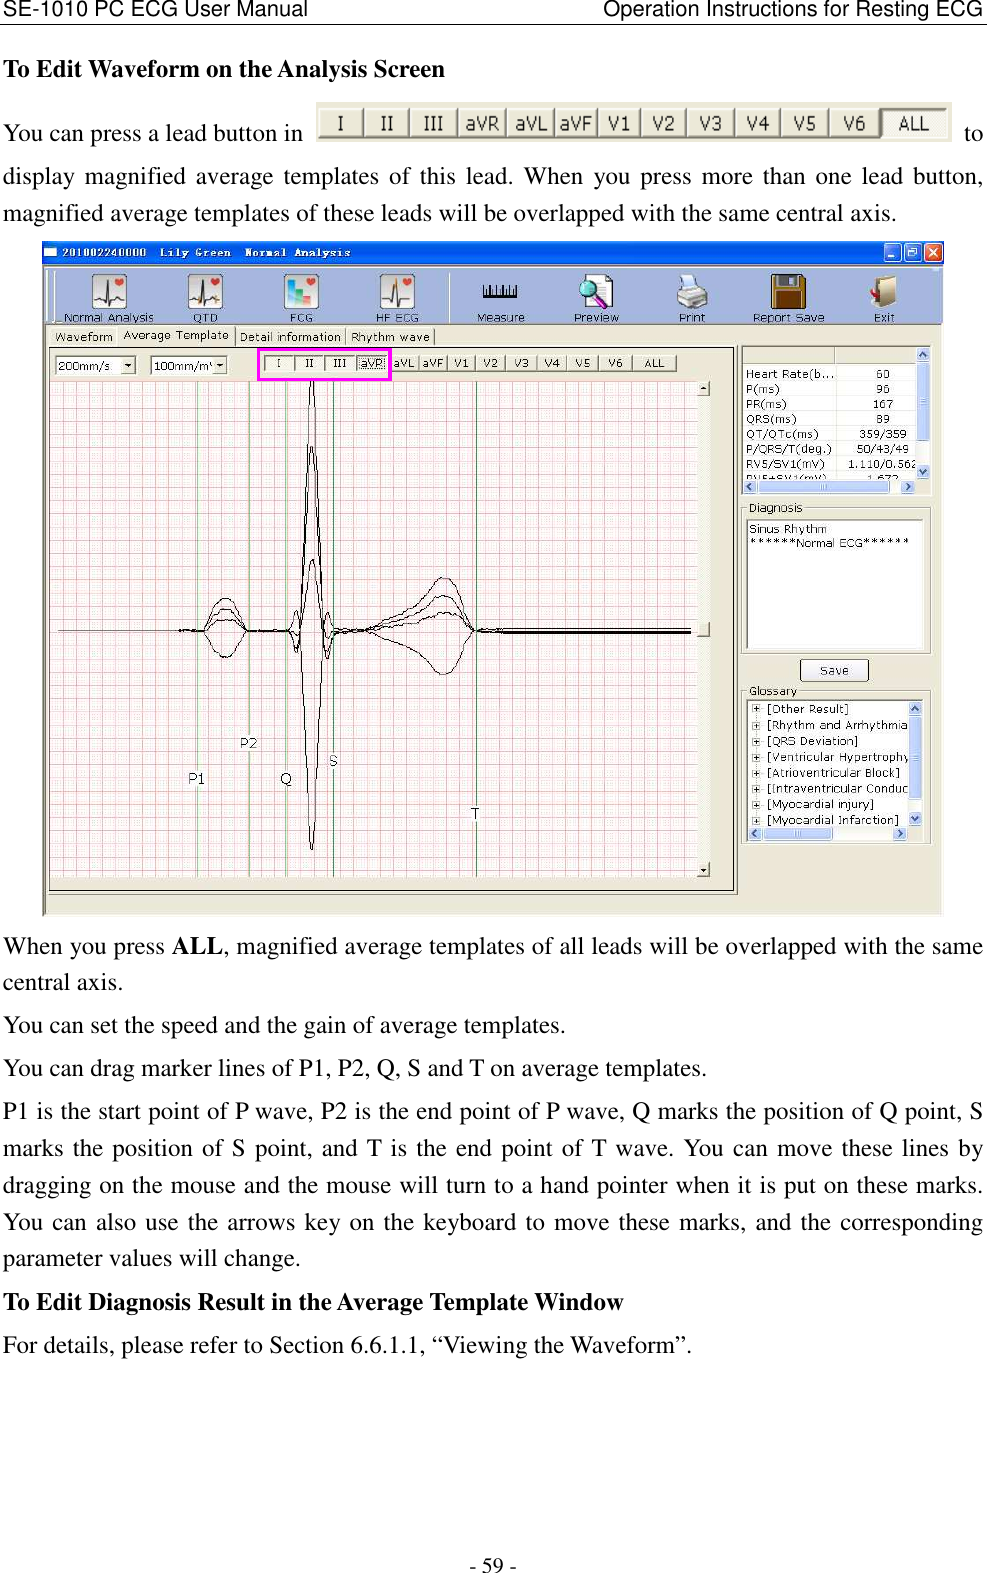 SE-1010 PC ECG User Manual                                                      Operation Instructions for Resting ECG - 59 - To Edit Waveform on the Analysis Screen You can press a lead button in    to display magnified average templates of this lead. When  you press more than one lead button, magnified average templates of these leads will be overlapped with the same central axis.  When you press ALL, magnified average templates of all leads will be overlapped with the same central axis. You can set the speed and the gain of average templates. You can drag marker lines of P1, P2, Q, S and T on average templates. P1 is the start point of P wave, P2 is the end point of P wave, Q marks the position of Q point, S marks the position of S point, and T is the end point of T wave. You can move these lines by dragging on the mouse and the mouse will turn to a hand pointer when it is put on these marks. You can also use the arrows key on the keyboard to move these marks, and the corresponding parameter values will change. To Edit Diagnosis Result in the Average Template Window For details, please refer to Section 6.6.1.1, “Viewing the Waveform”.    